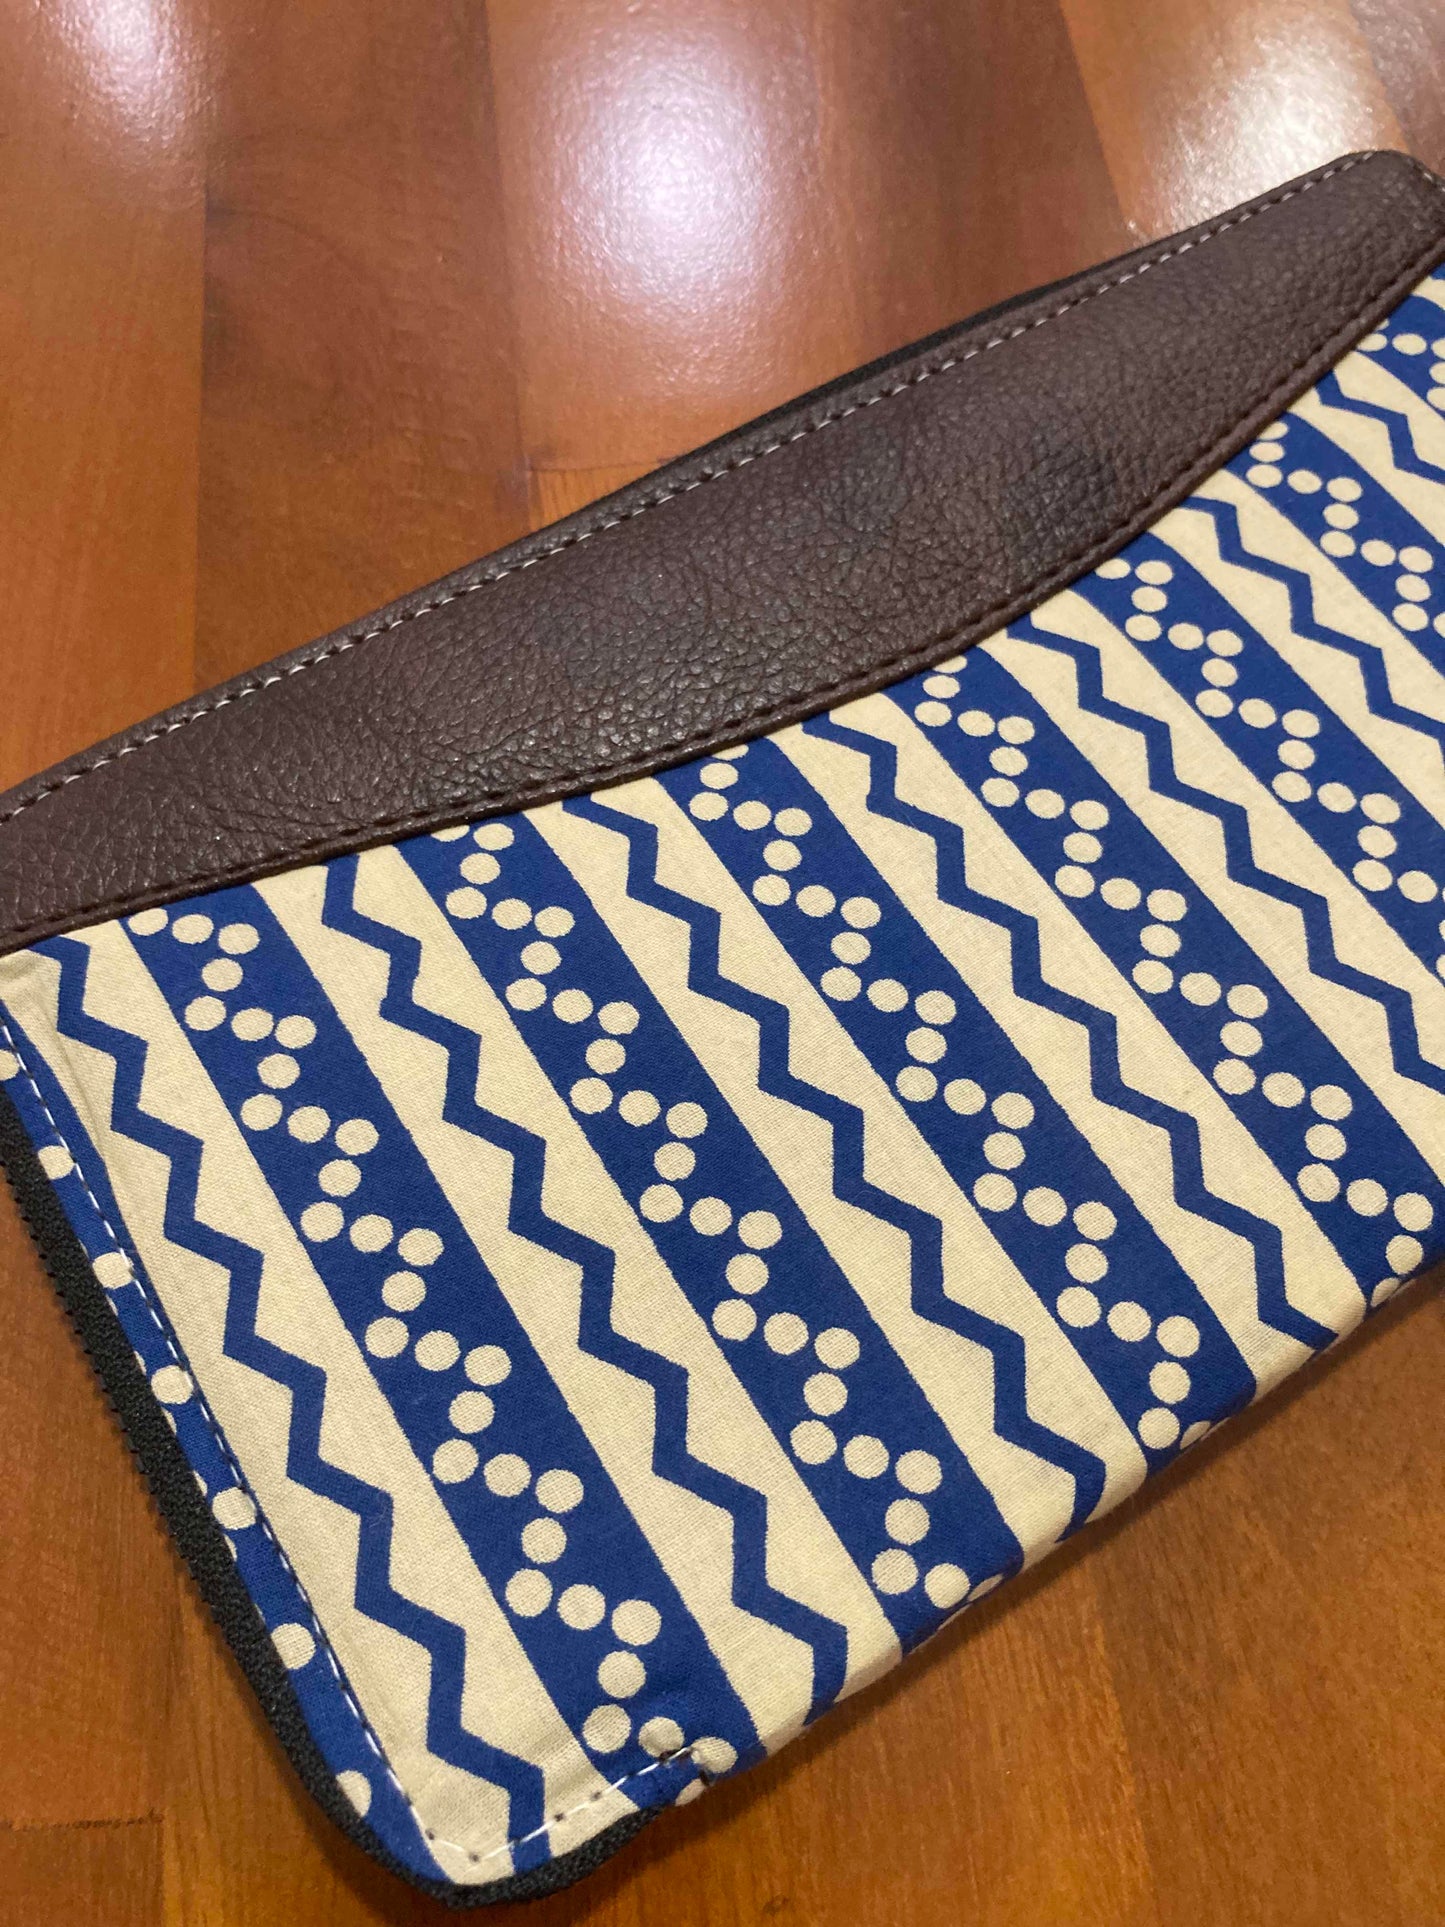 Southloom™ Handmade Purse with Blue and Beige Jacquard Cloth and Leatherette